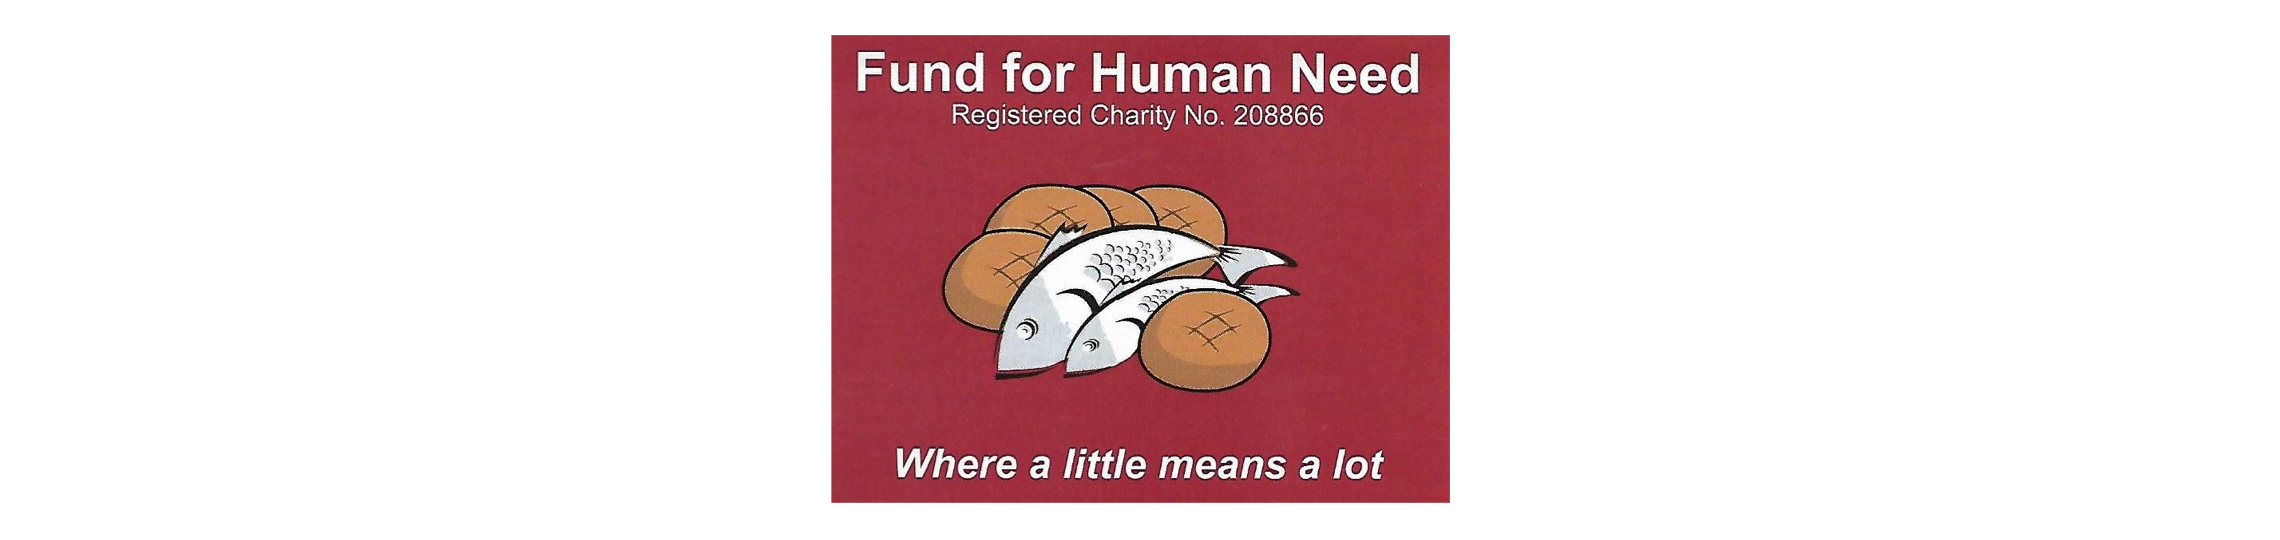 Fund for Human Need